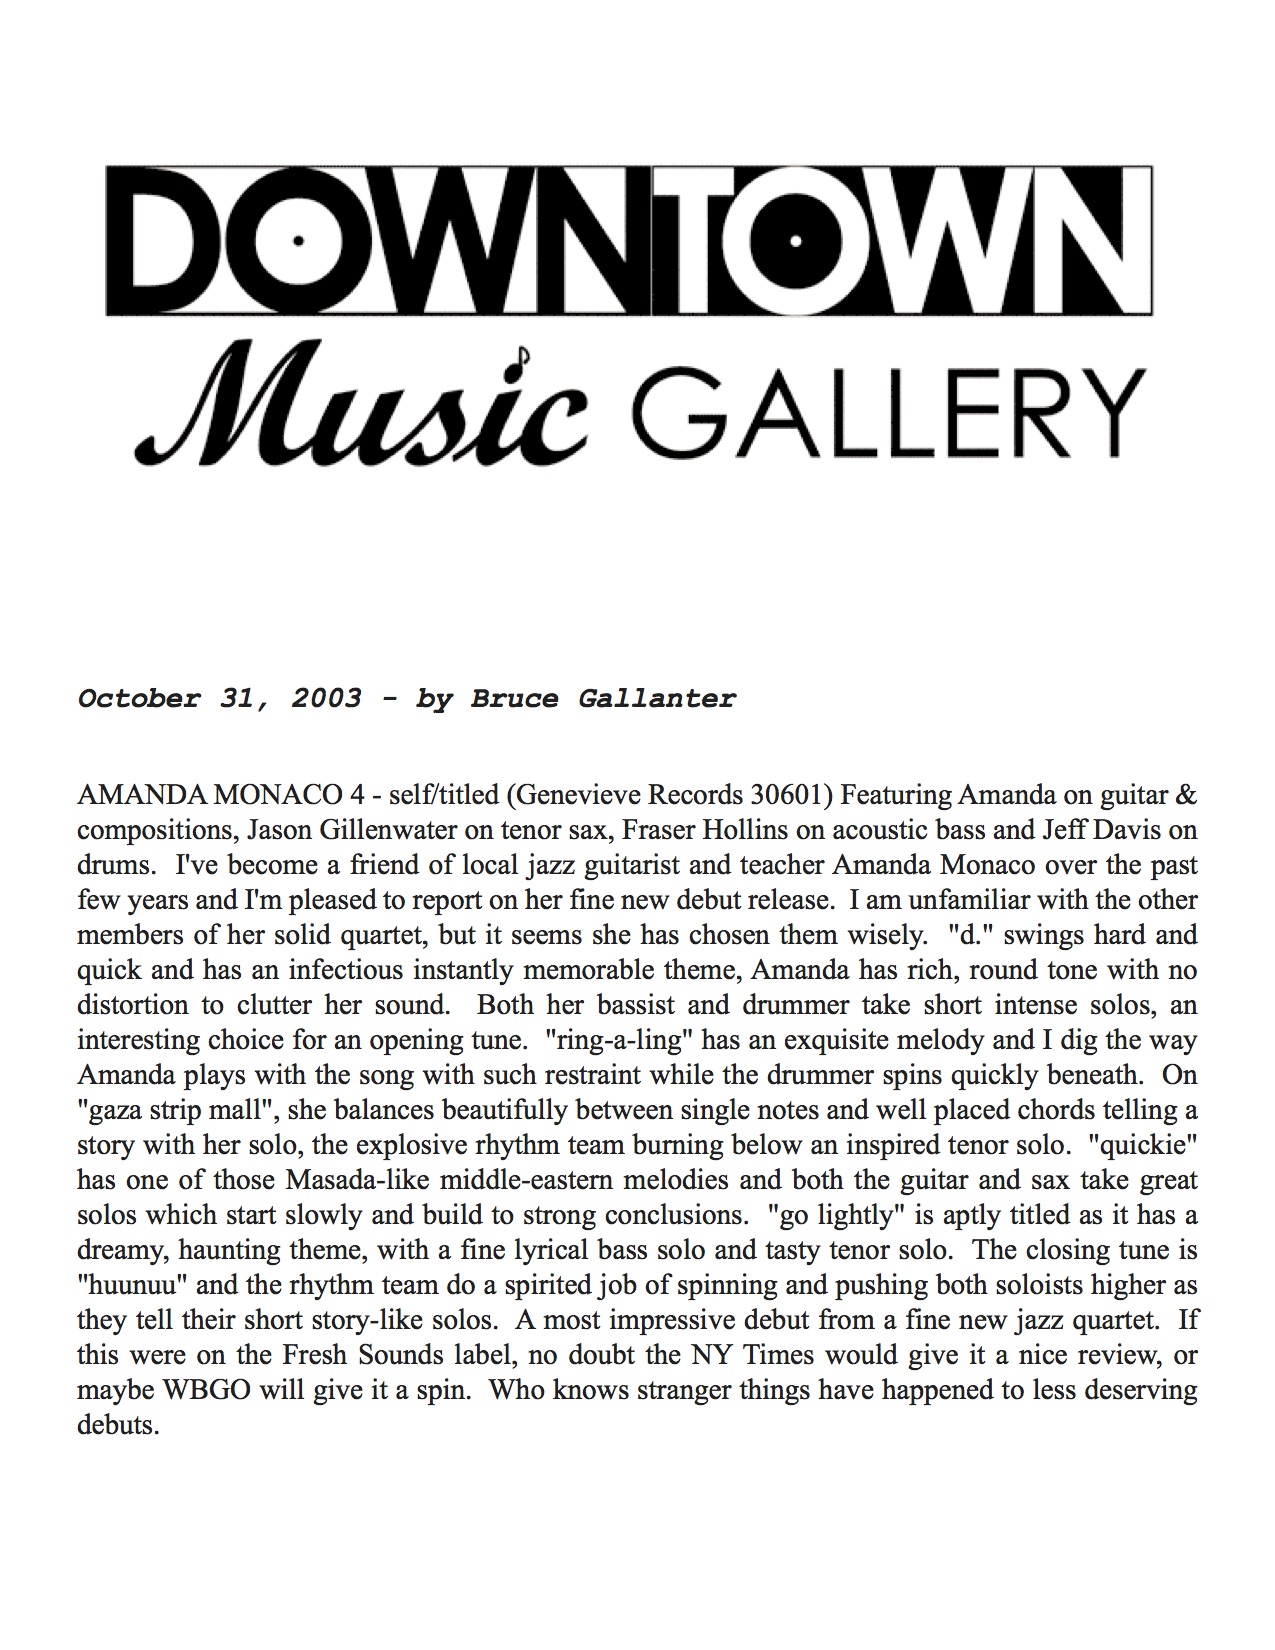 downtown-music-gallery